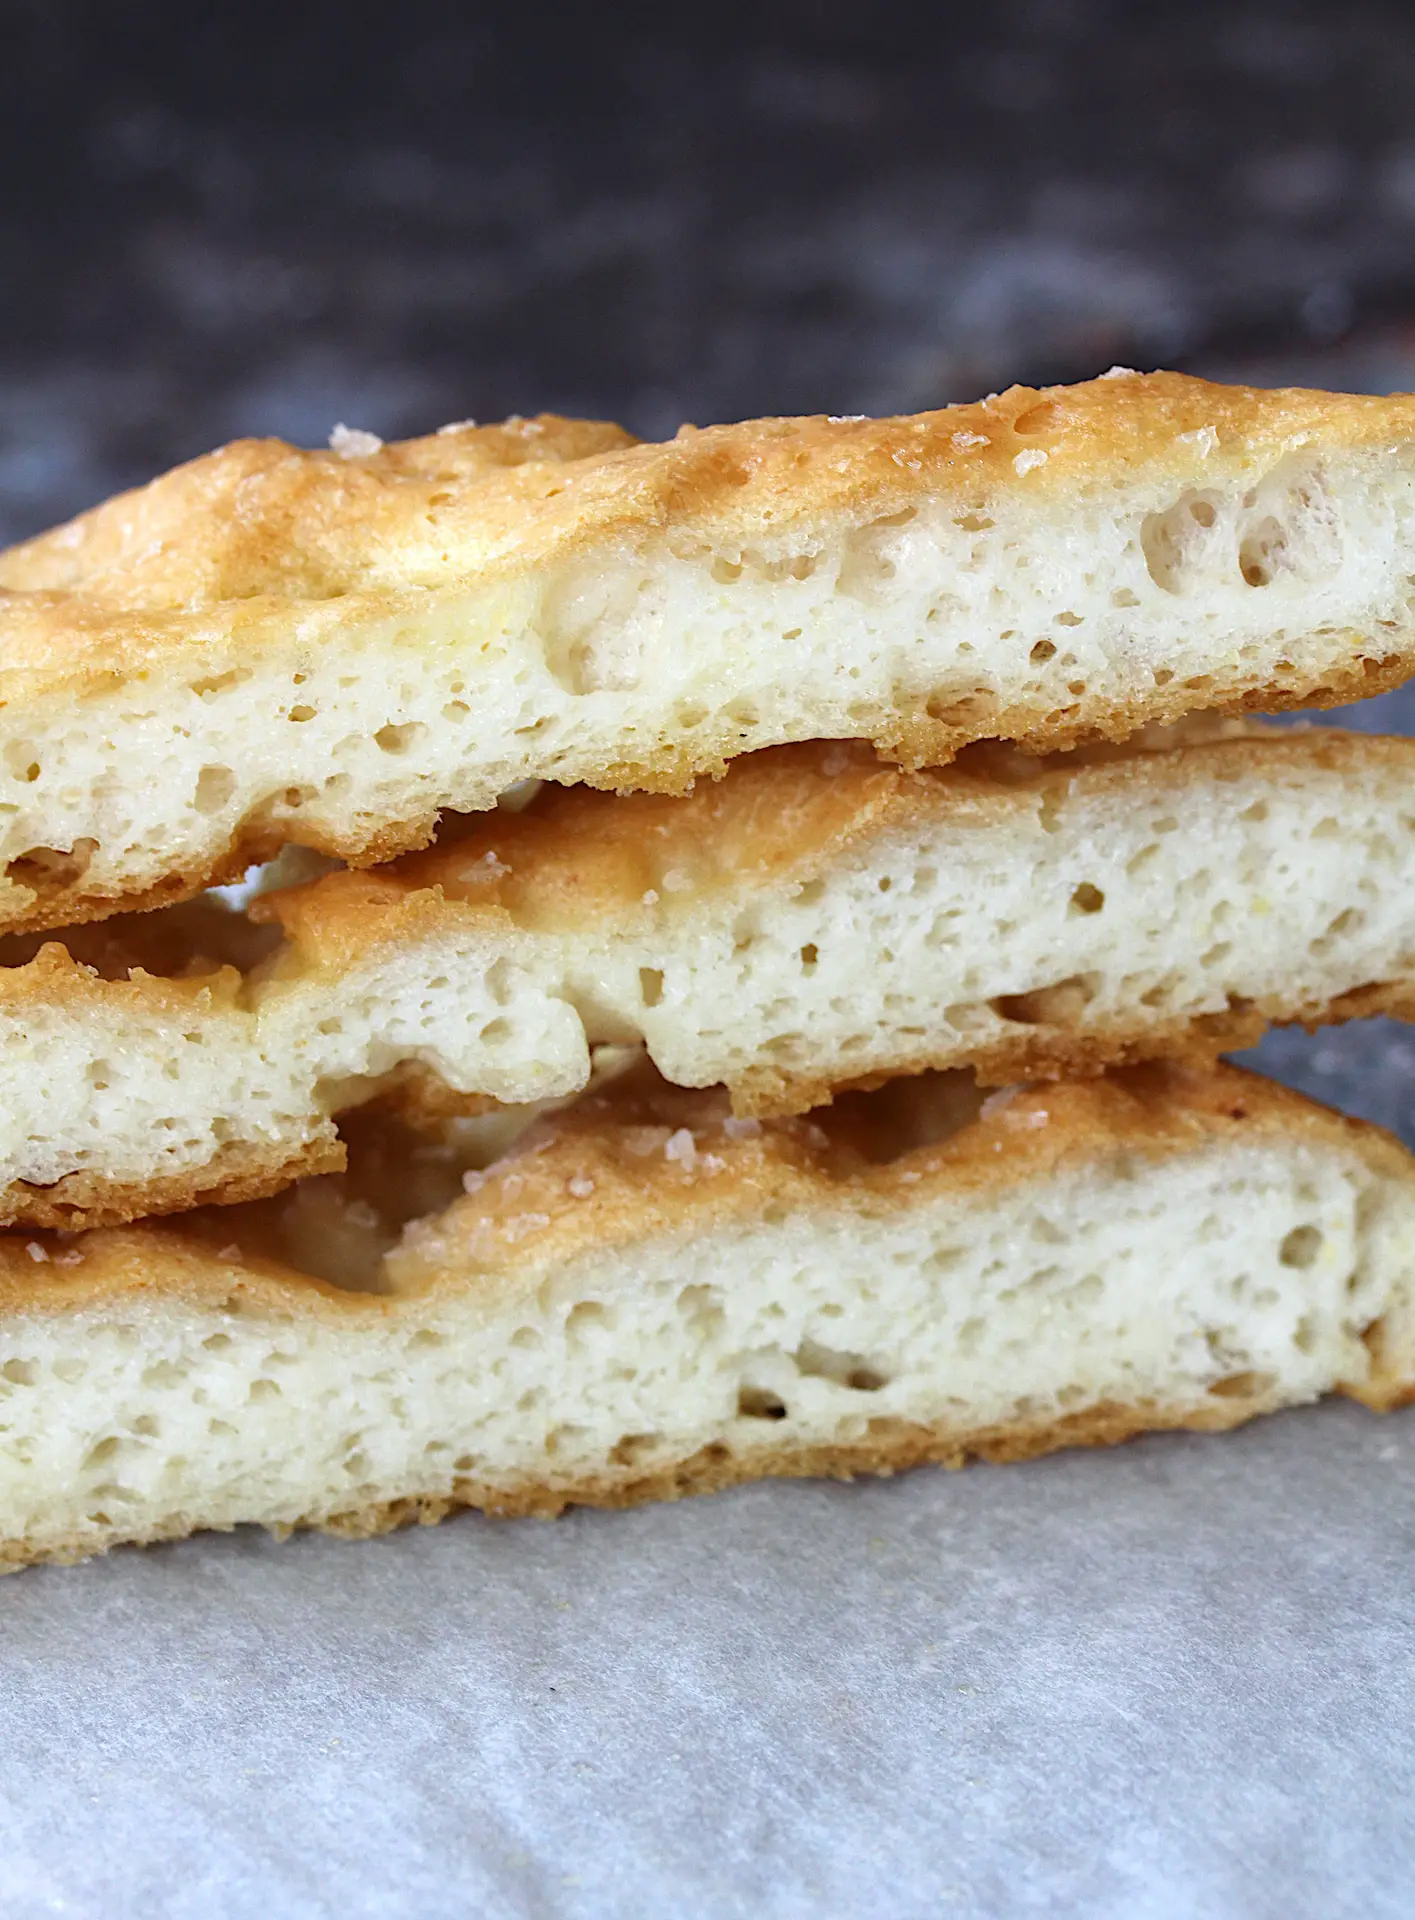 image of the focaccia bread sliced and stacked on top of each other to show the texture of the inside.